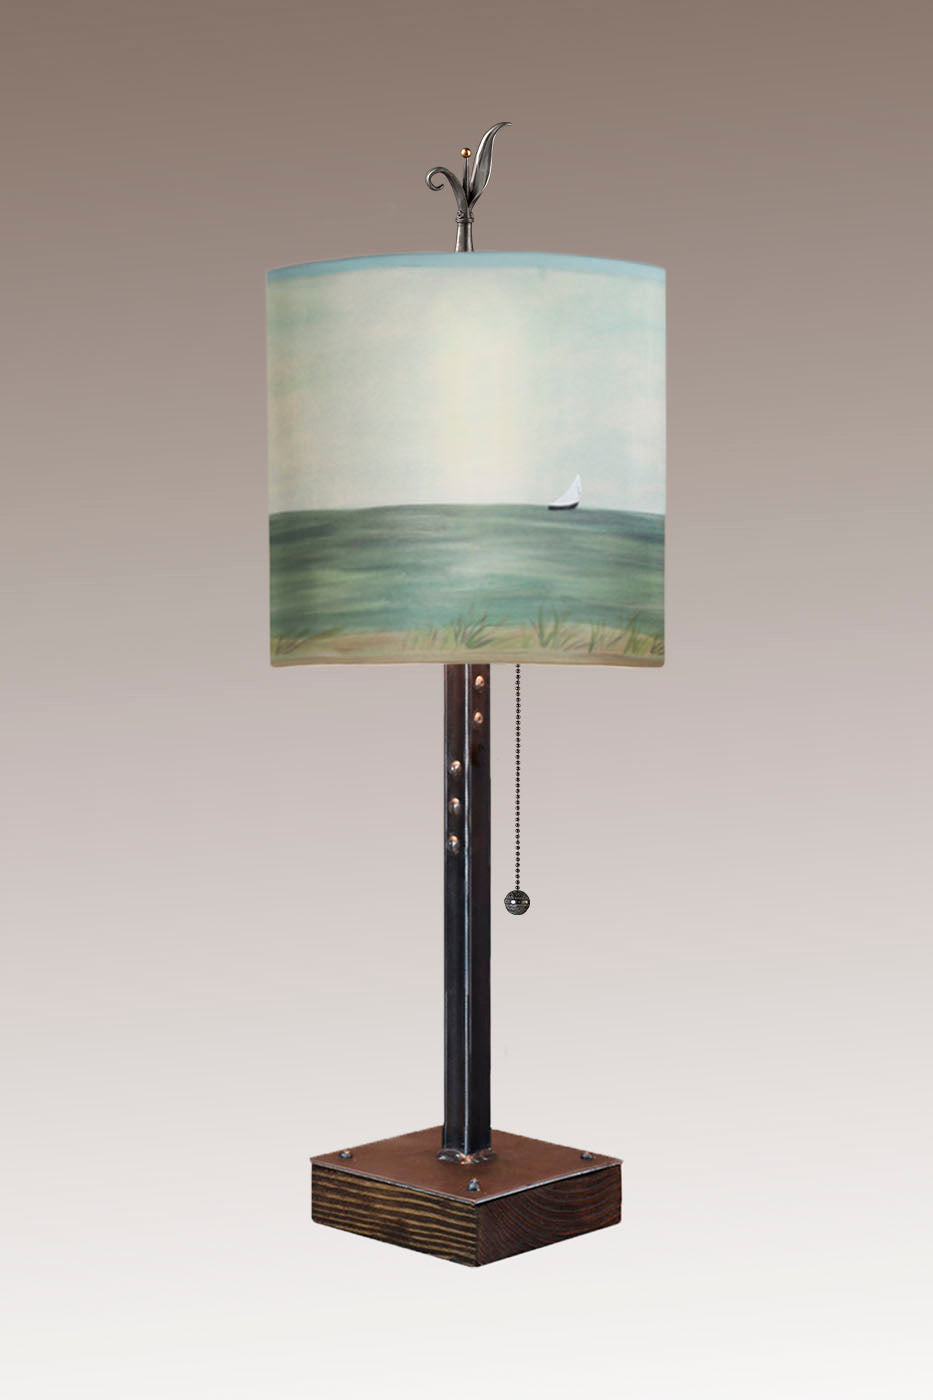 Janna Ugone &amp; Co Table Lamps Steel Table Lamp on Wood with Medium Drum Shade in Shore